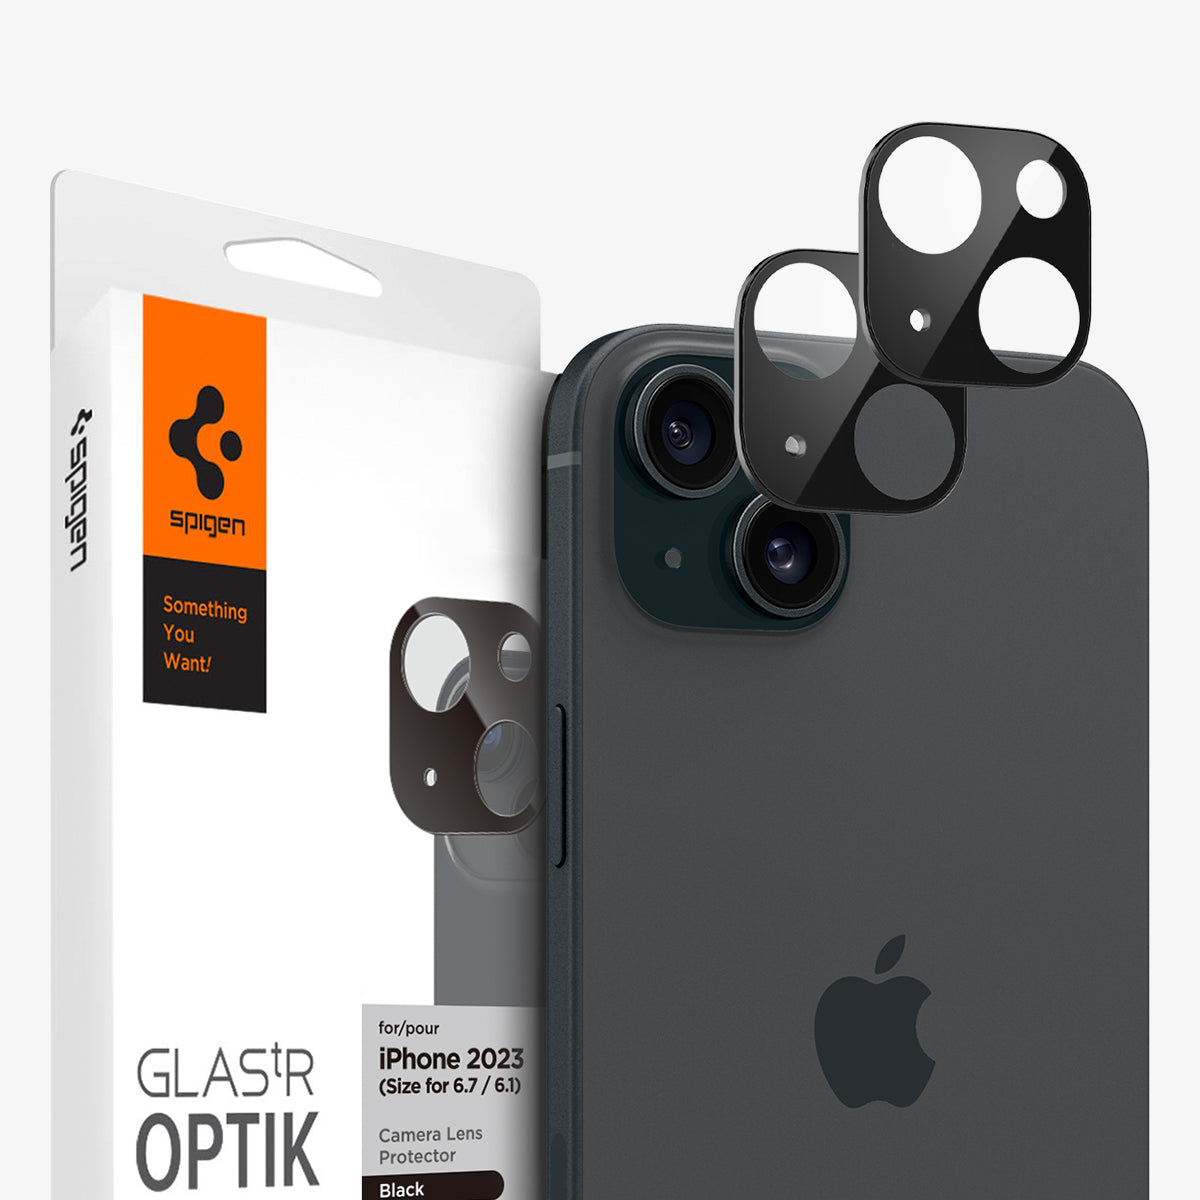 AGL06917 - iPhone 15 / 15 Plus Optik Lens Protector in black showing the device, two lens protectors and packaging